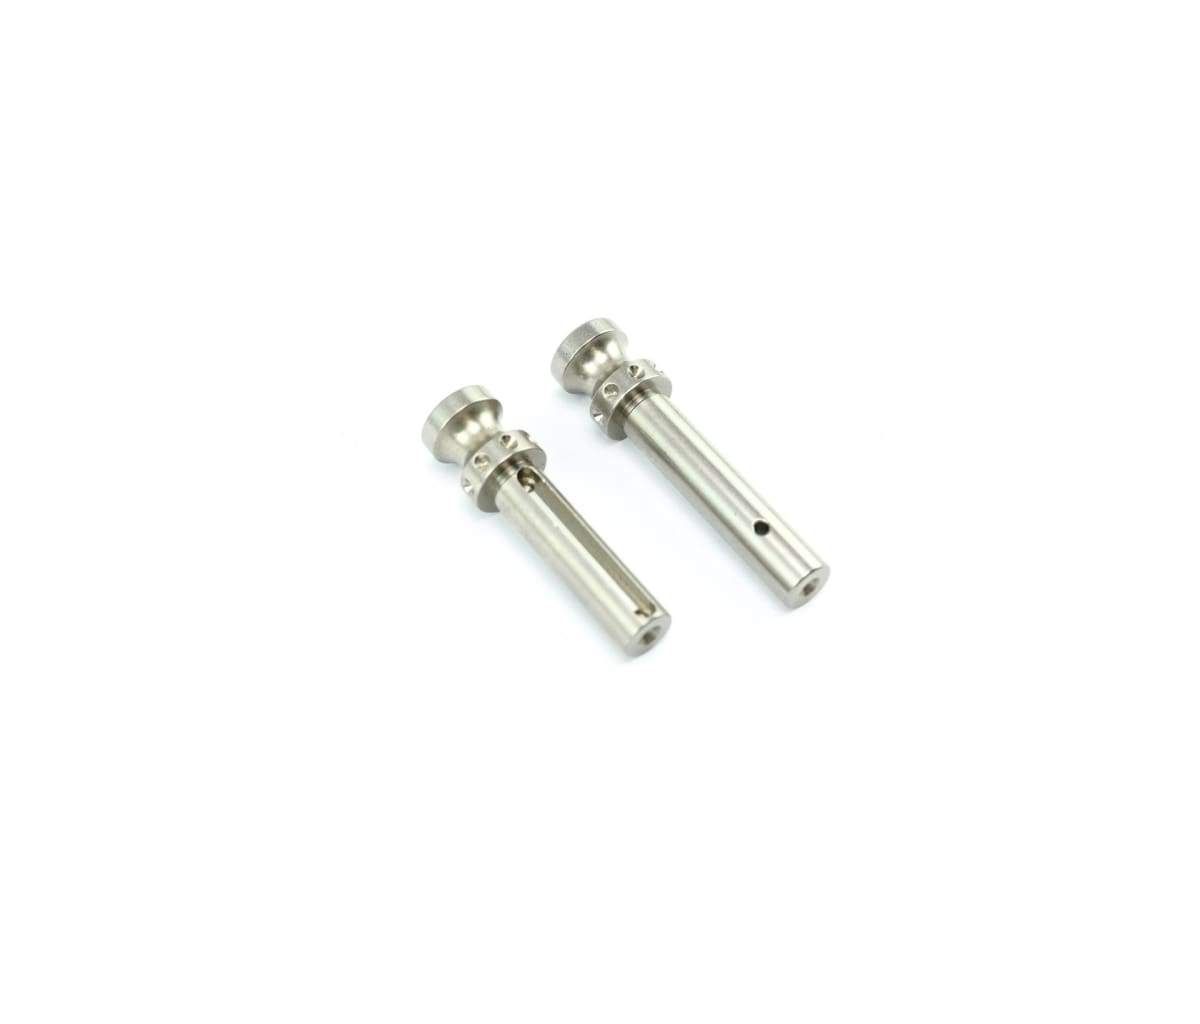 Nbs Ar 15 Easy Pull Takedown Pivot Pins Stainless Steel Front